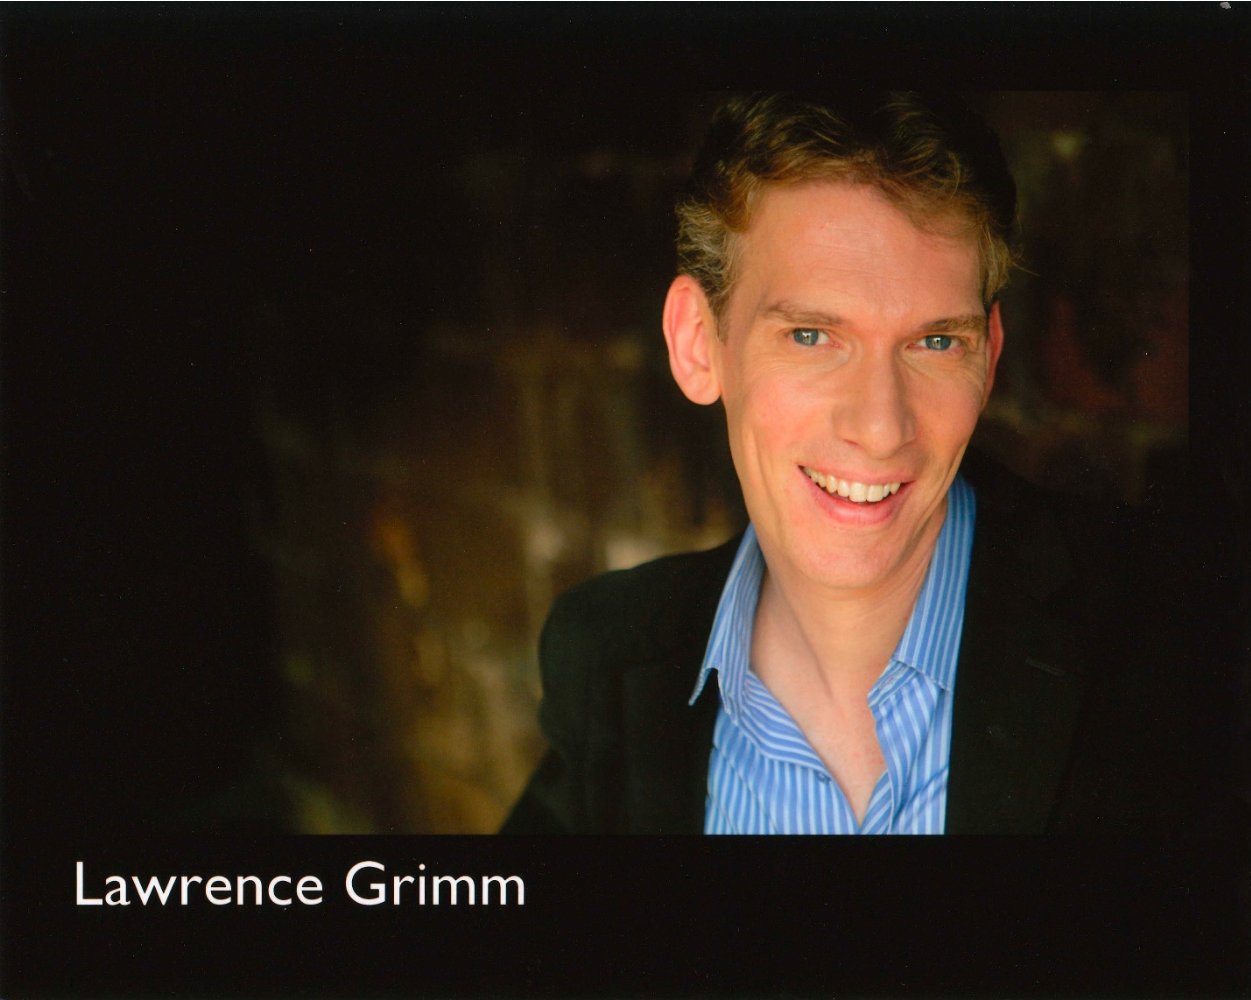 Lawrence Grimm